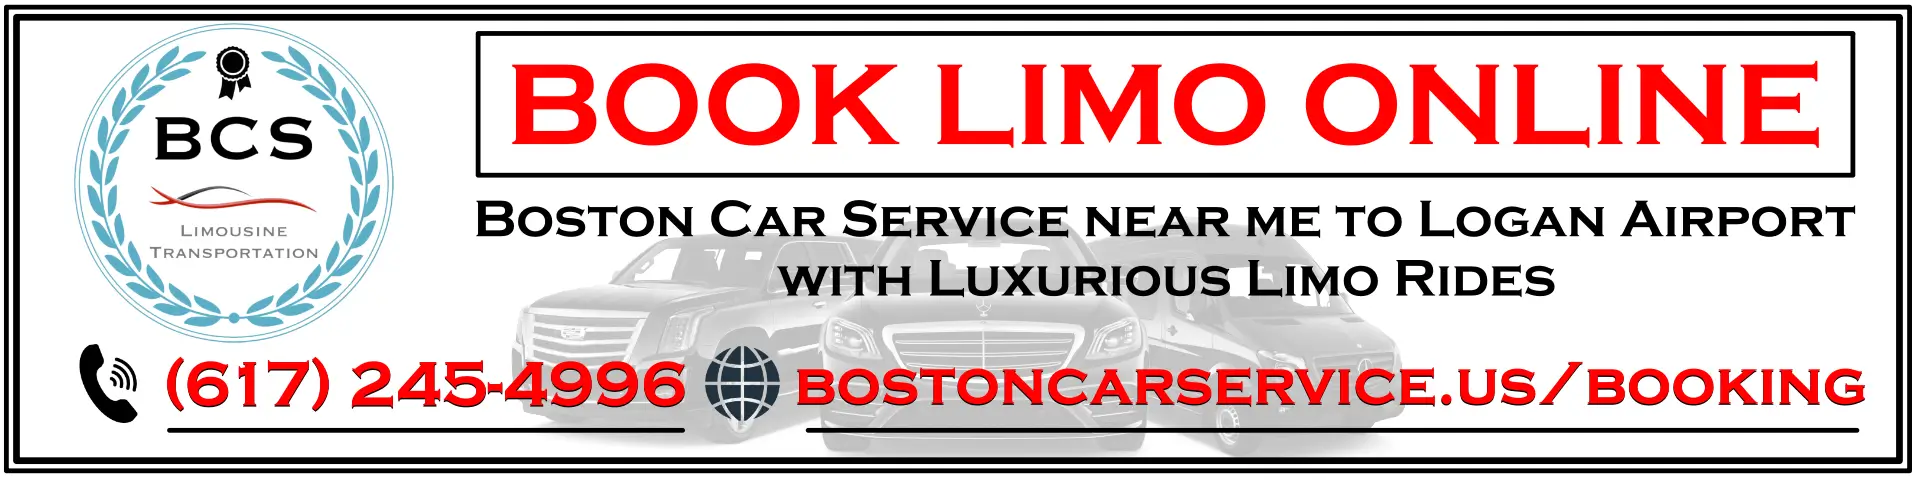 BOOK LIMO ONLINE.